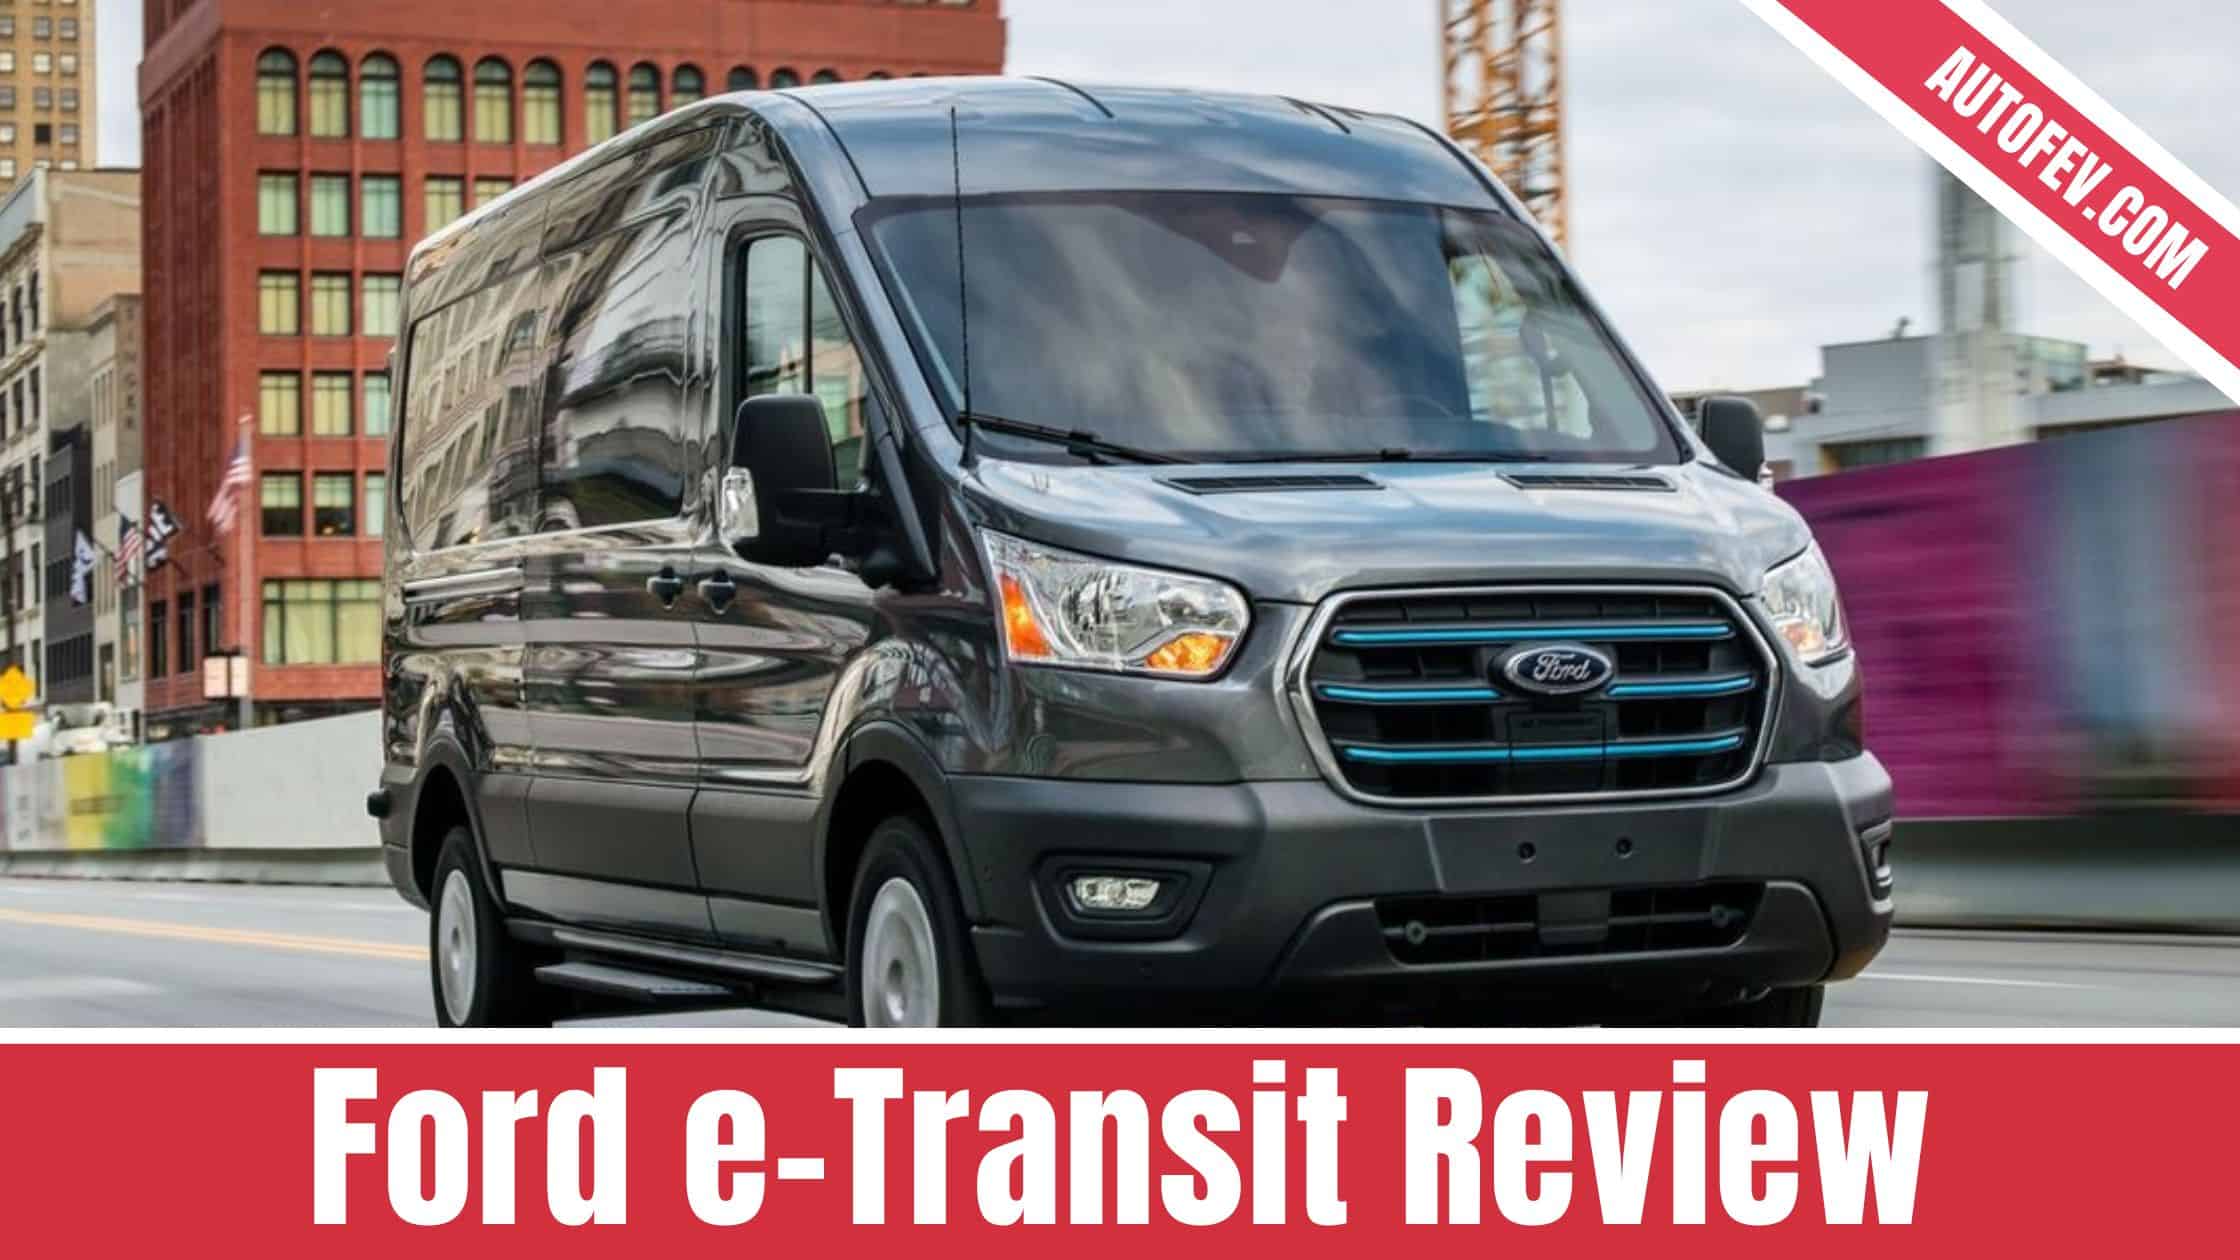 Ford e-Transit Review